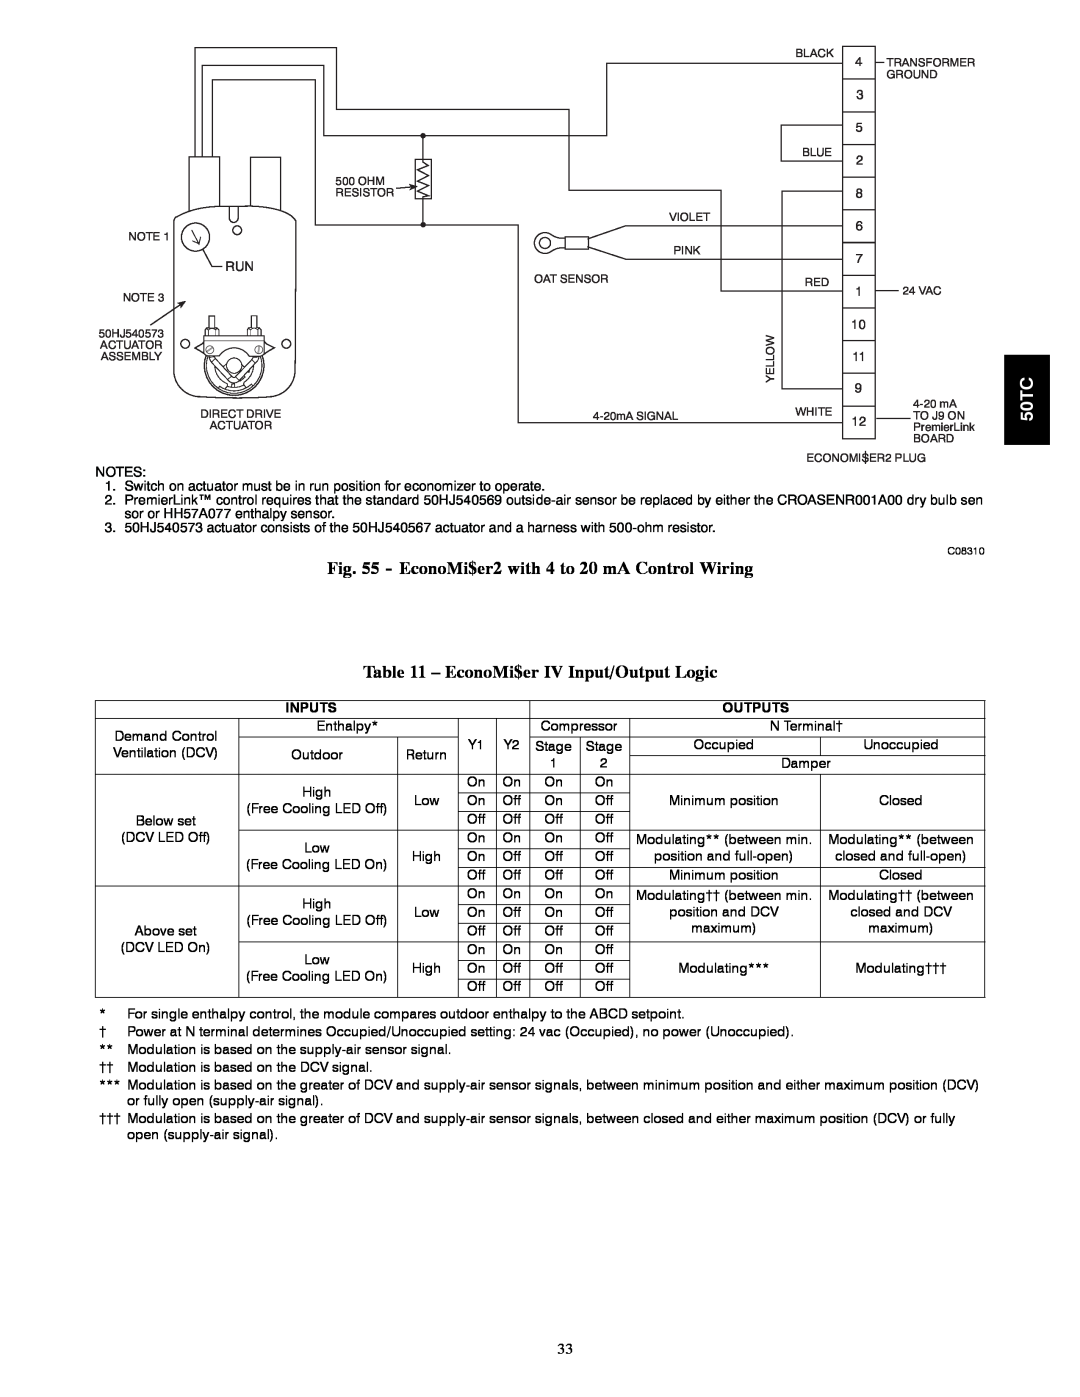 Carrier 50TCA04-A07 appendix EconoMi$er2 with 4 to 20 mA Control Wiring, EconoMi$er IV Input/Output Logic, Inputs, Outputs 